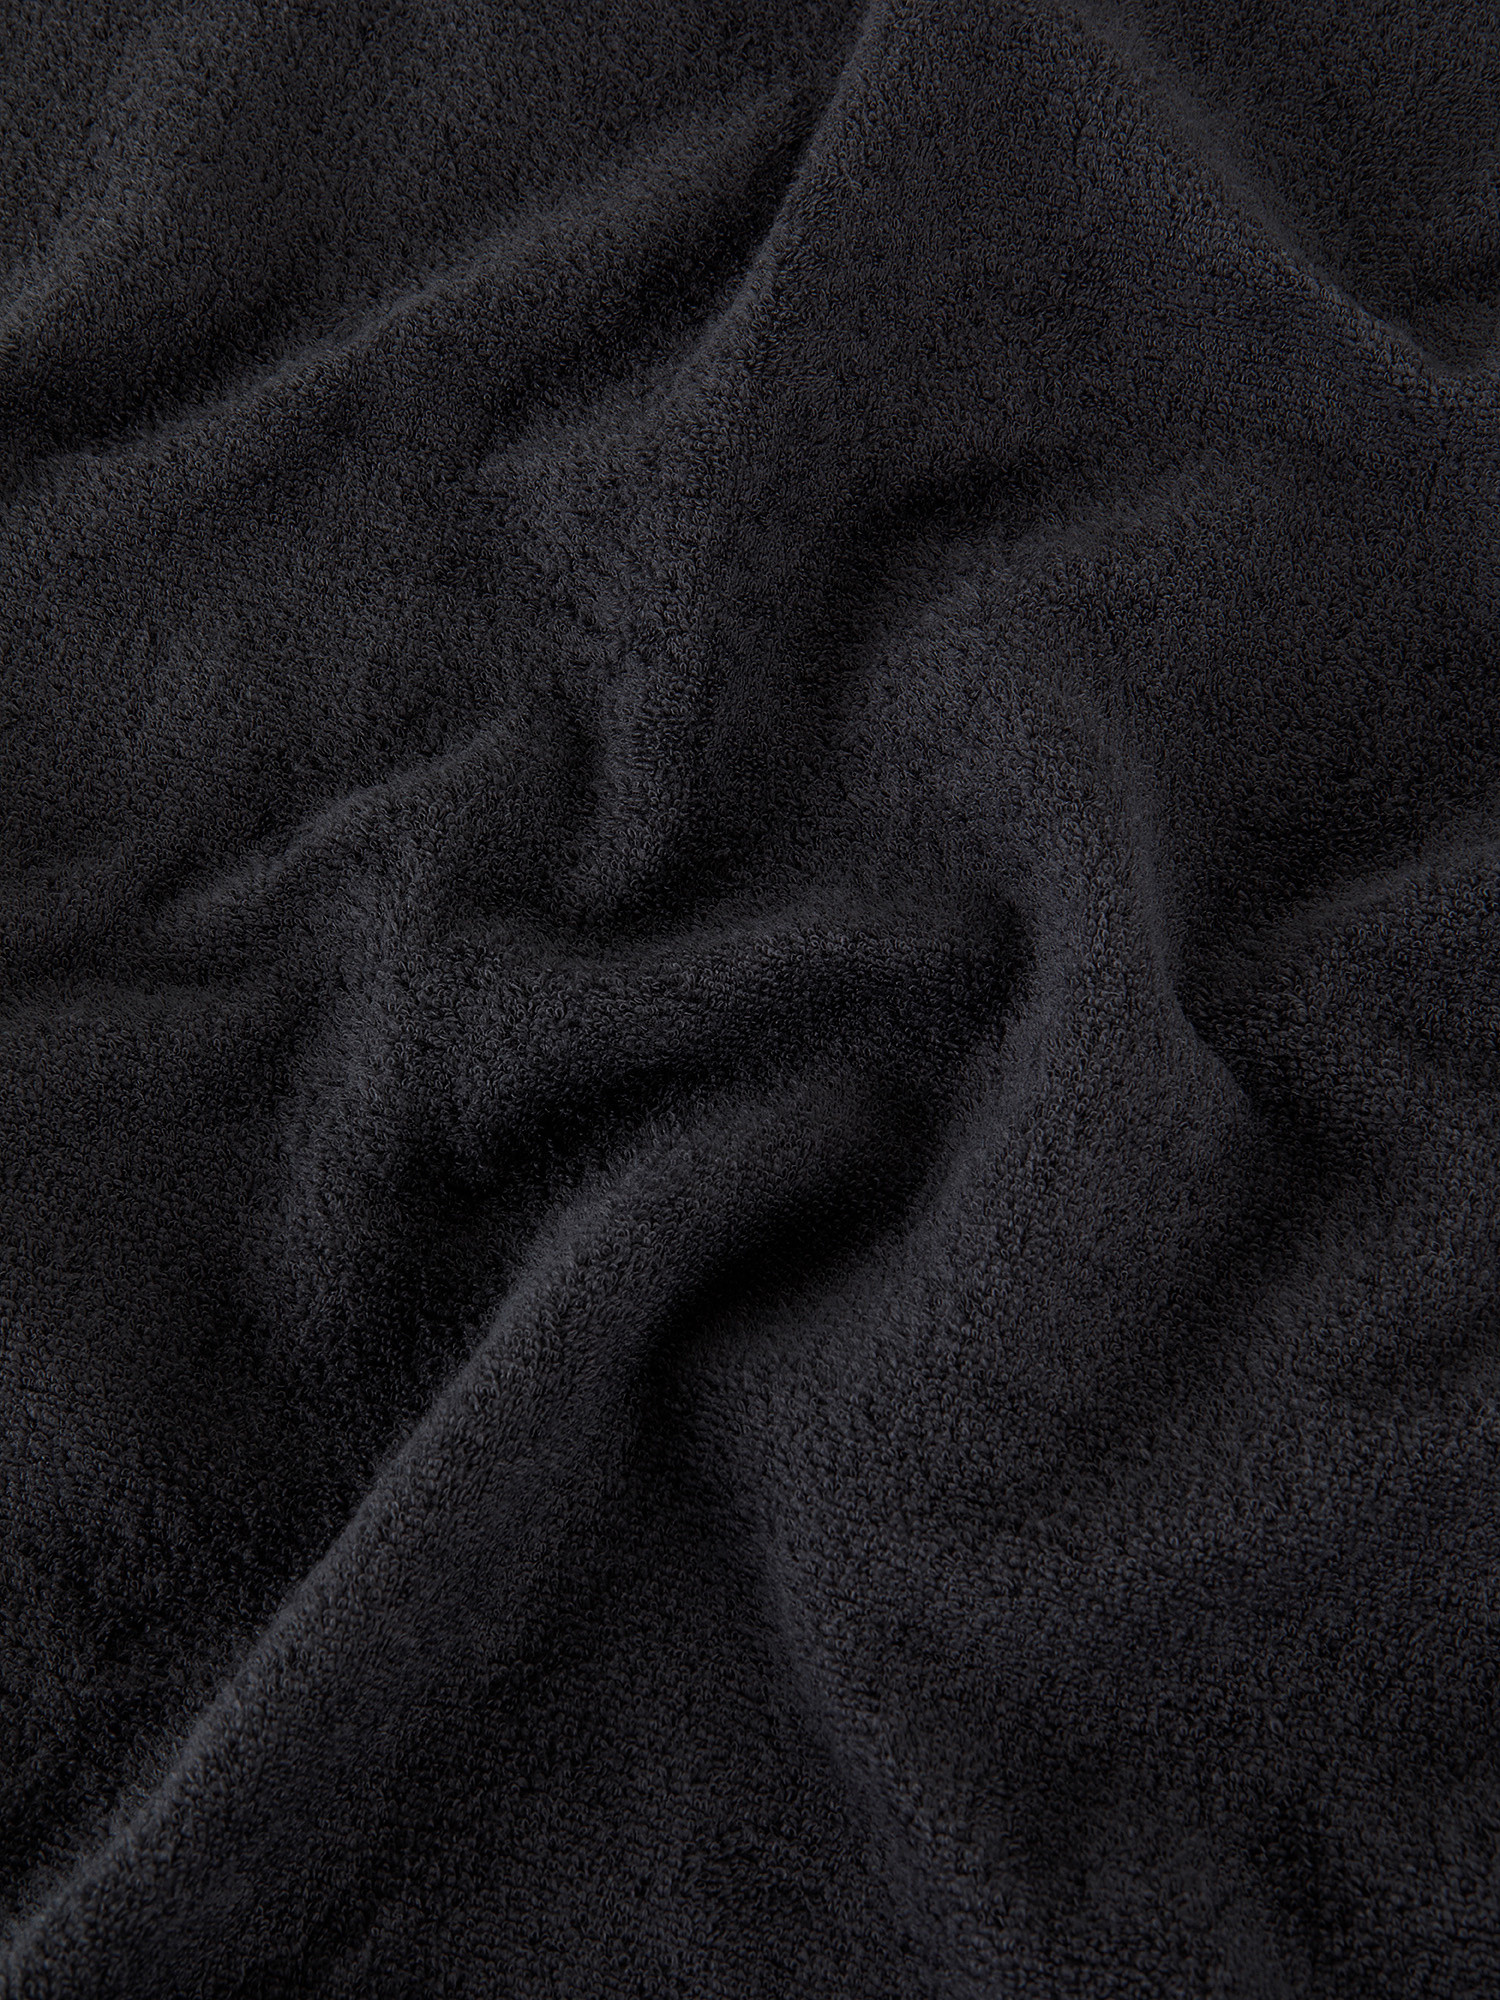 Thermae fine cotton terry towel, Dark Grey, large image number 1